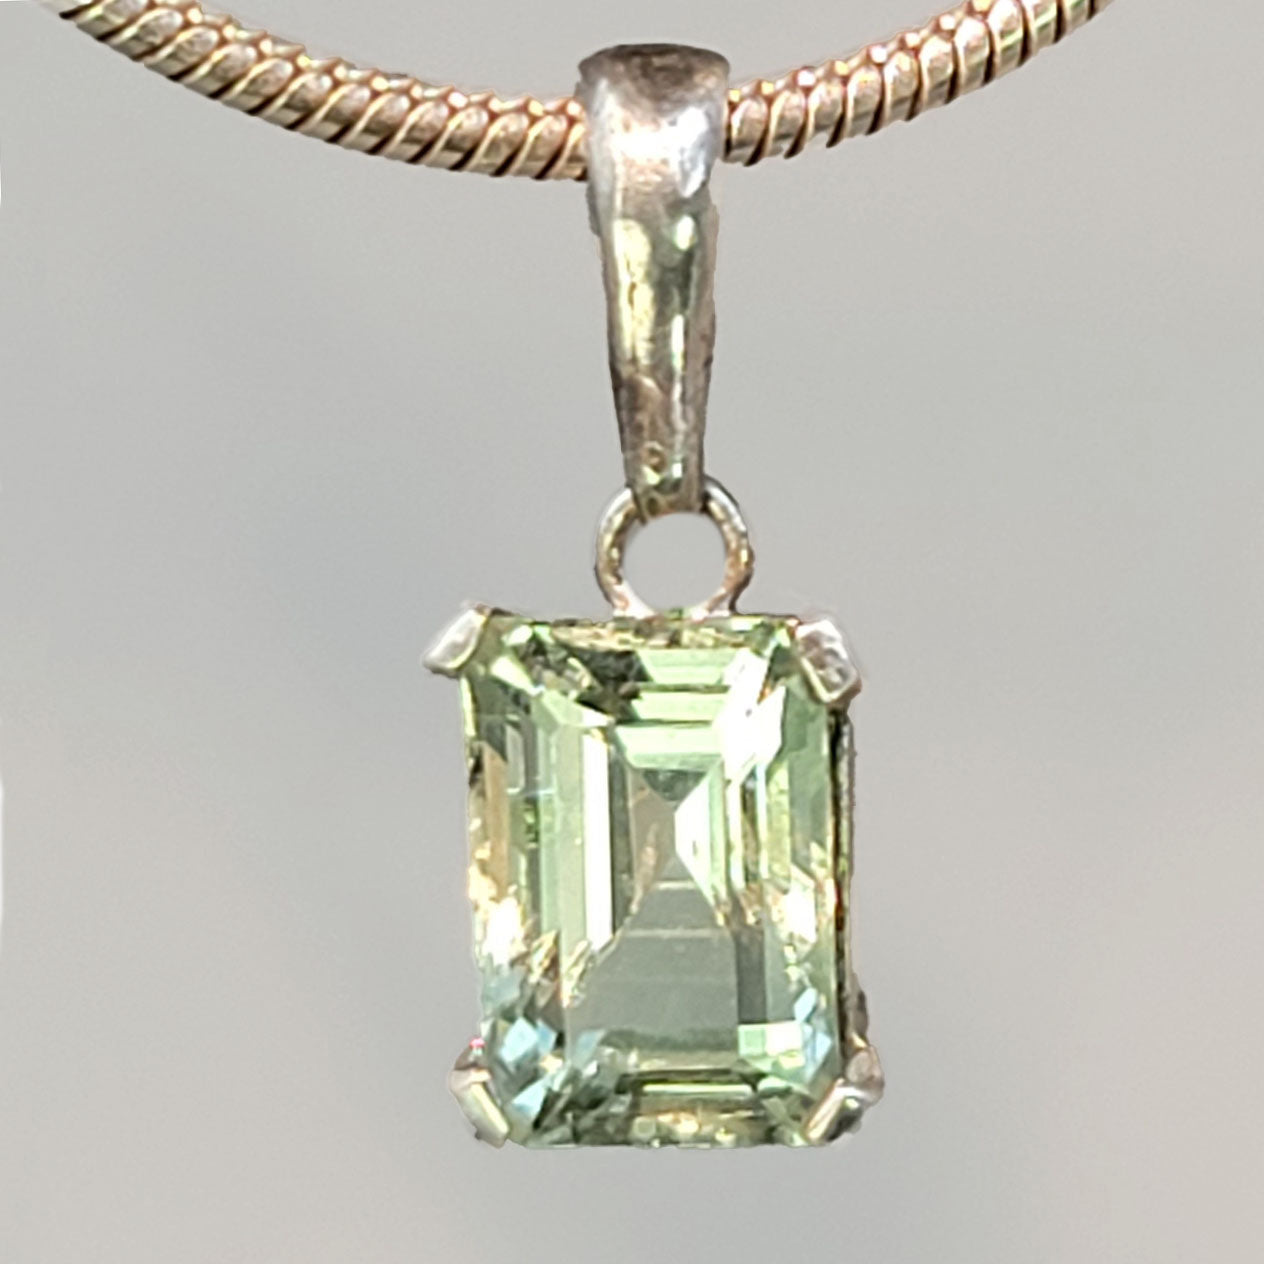 Green Beryl 3.70 ct Faceted Emerald Prong Set Sterling Silver Pendant